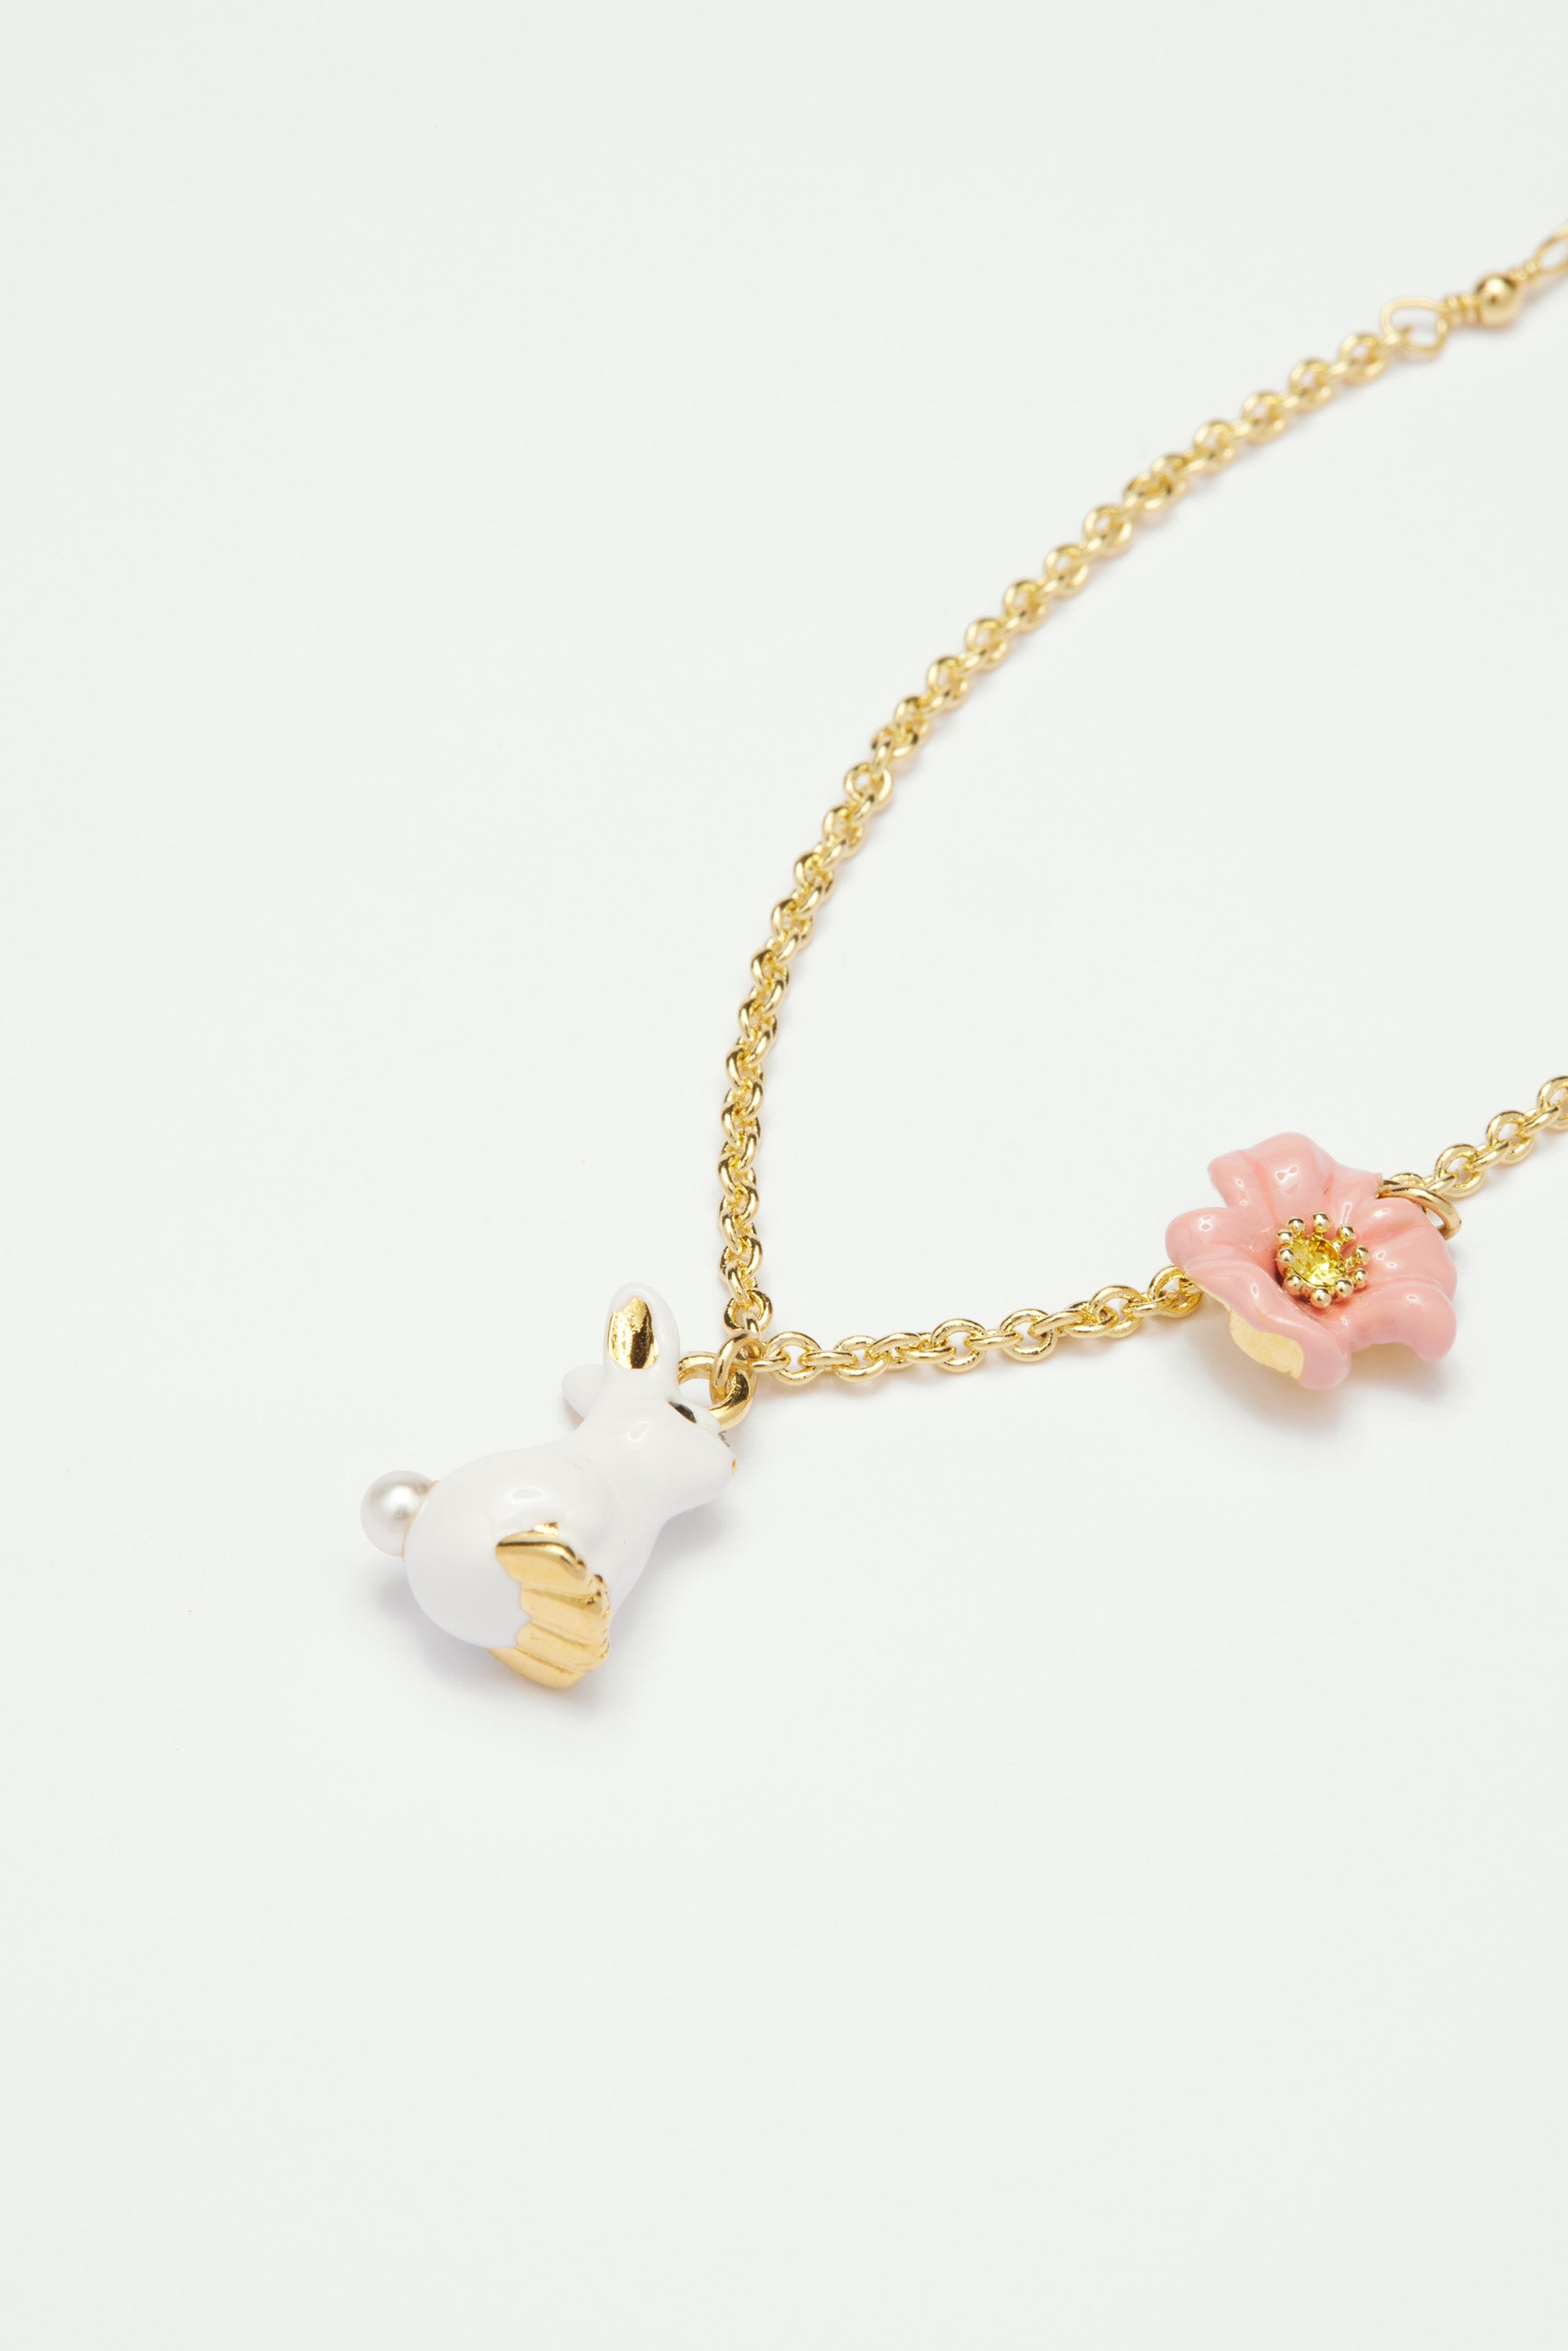 Rabbit and Pink Flower Thin Chain Bracelet